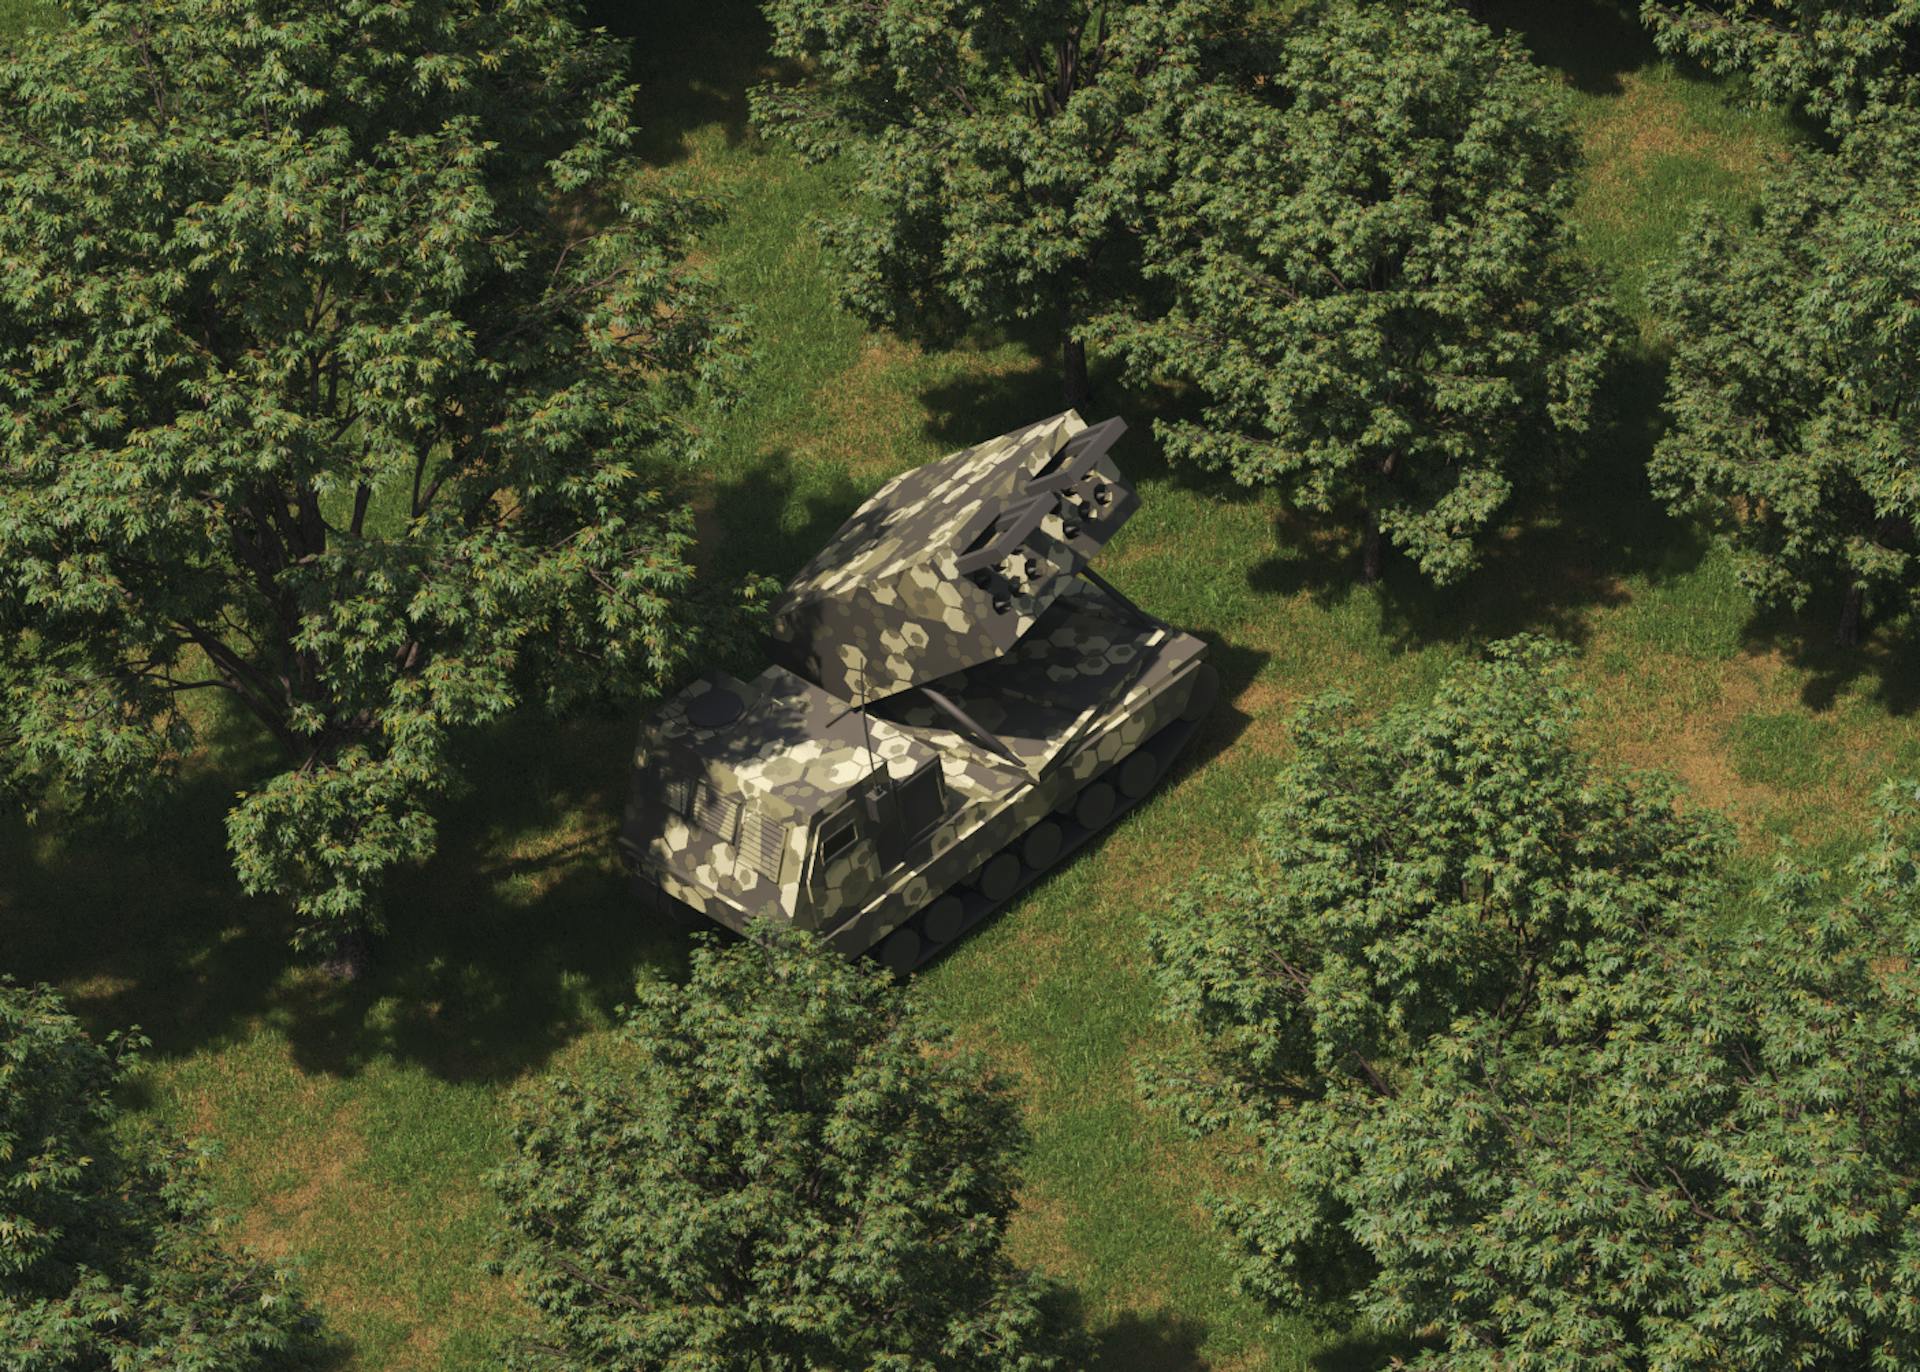 A CGI render of a tank in a forest.